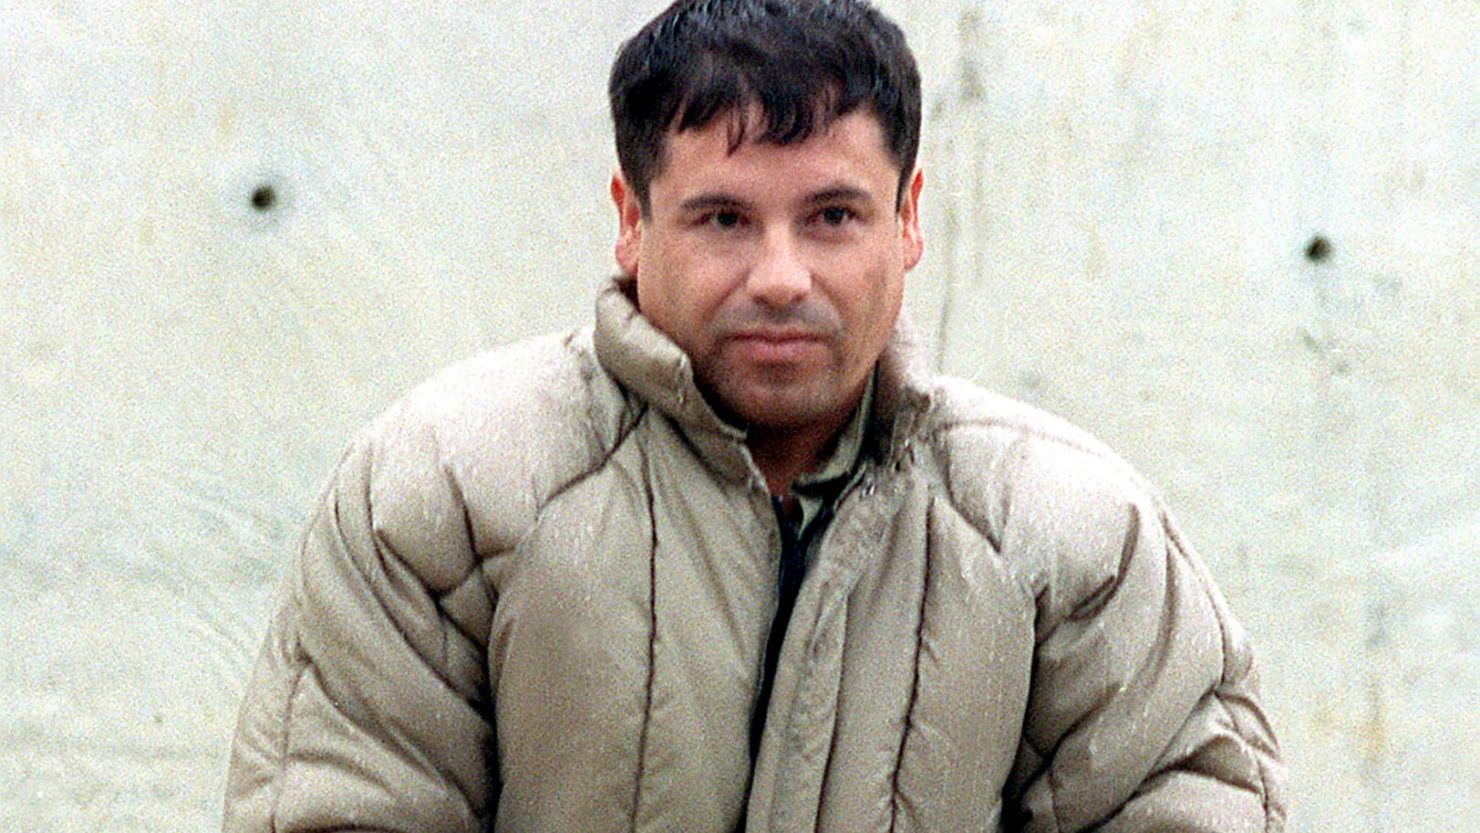 A file photo of drug trafficker Joaquin Guzman Loera 'el Chapo Guzman' at a Mexico maximum security prison before he escaped in 2001. He allegedly heads up the Sinaloa drug cartel who Spainish police say tried to establish a base in Europe.